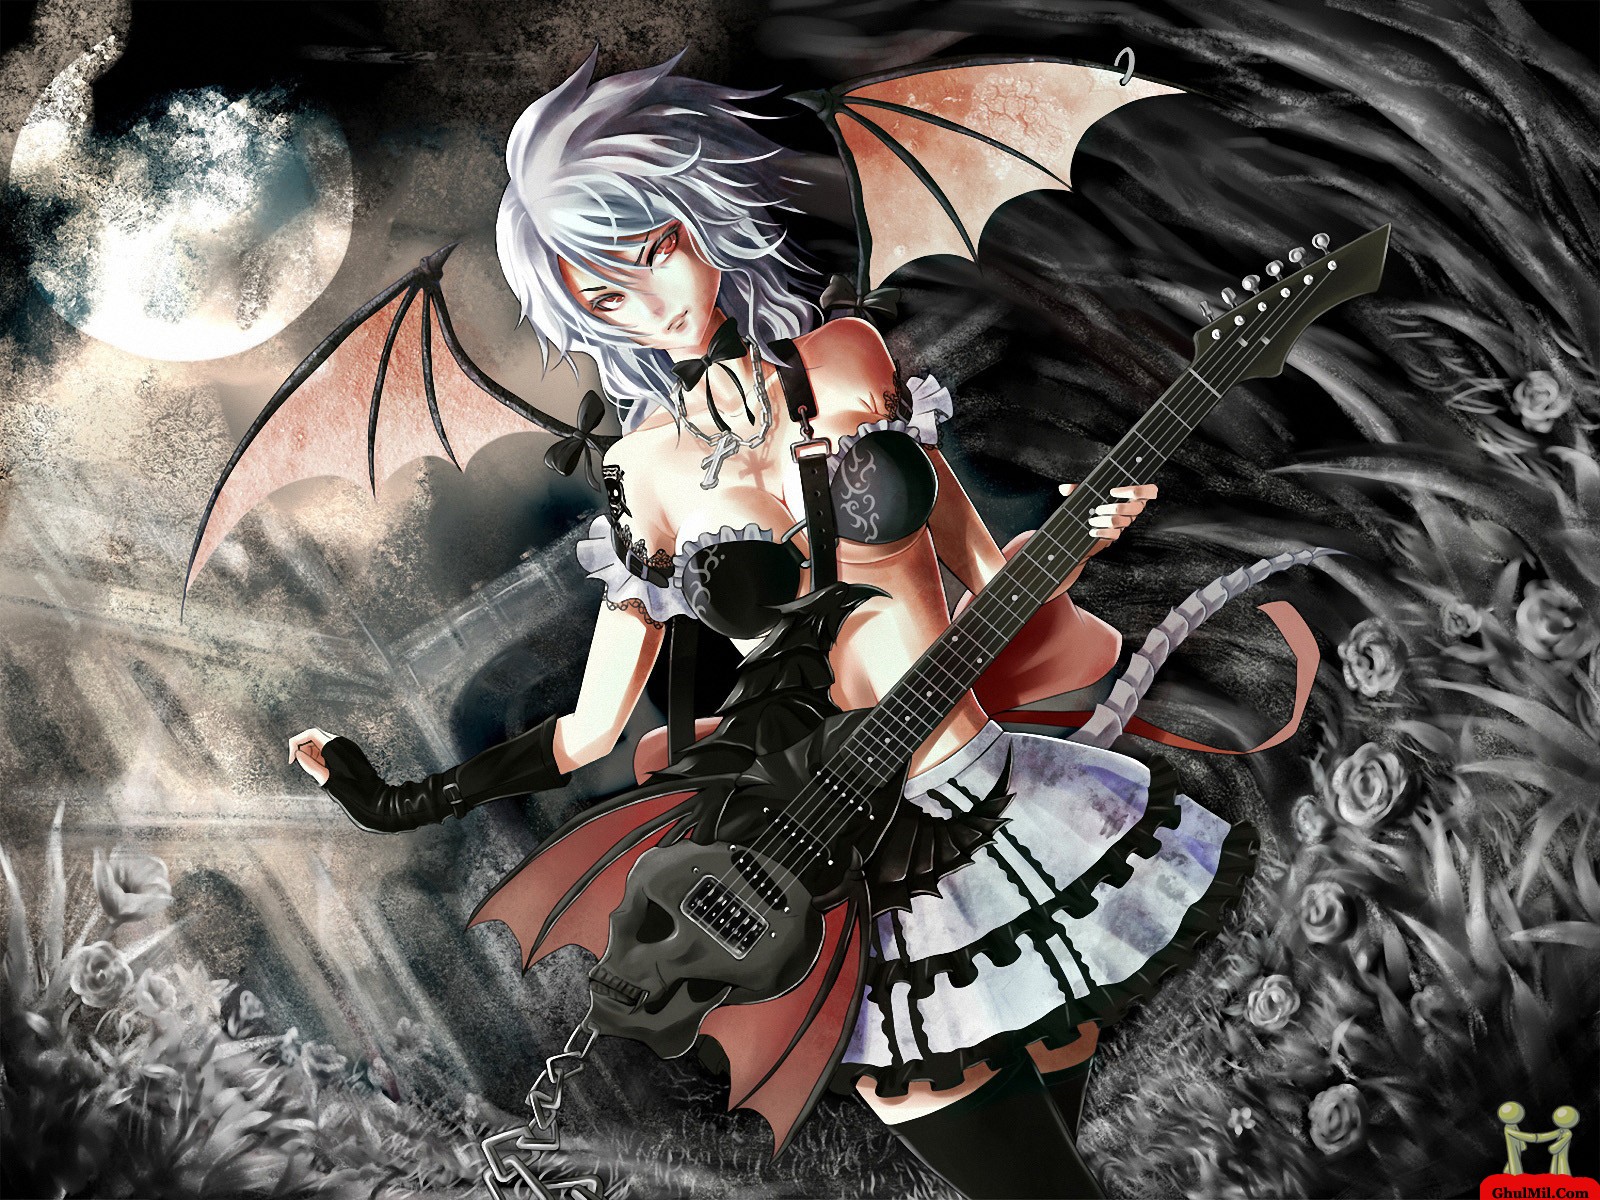 Awesome 3D Girl Playing Guitar Wallpaper E Entertainment